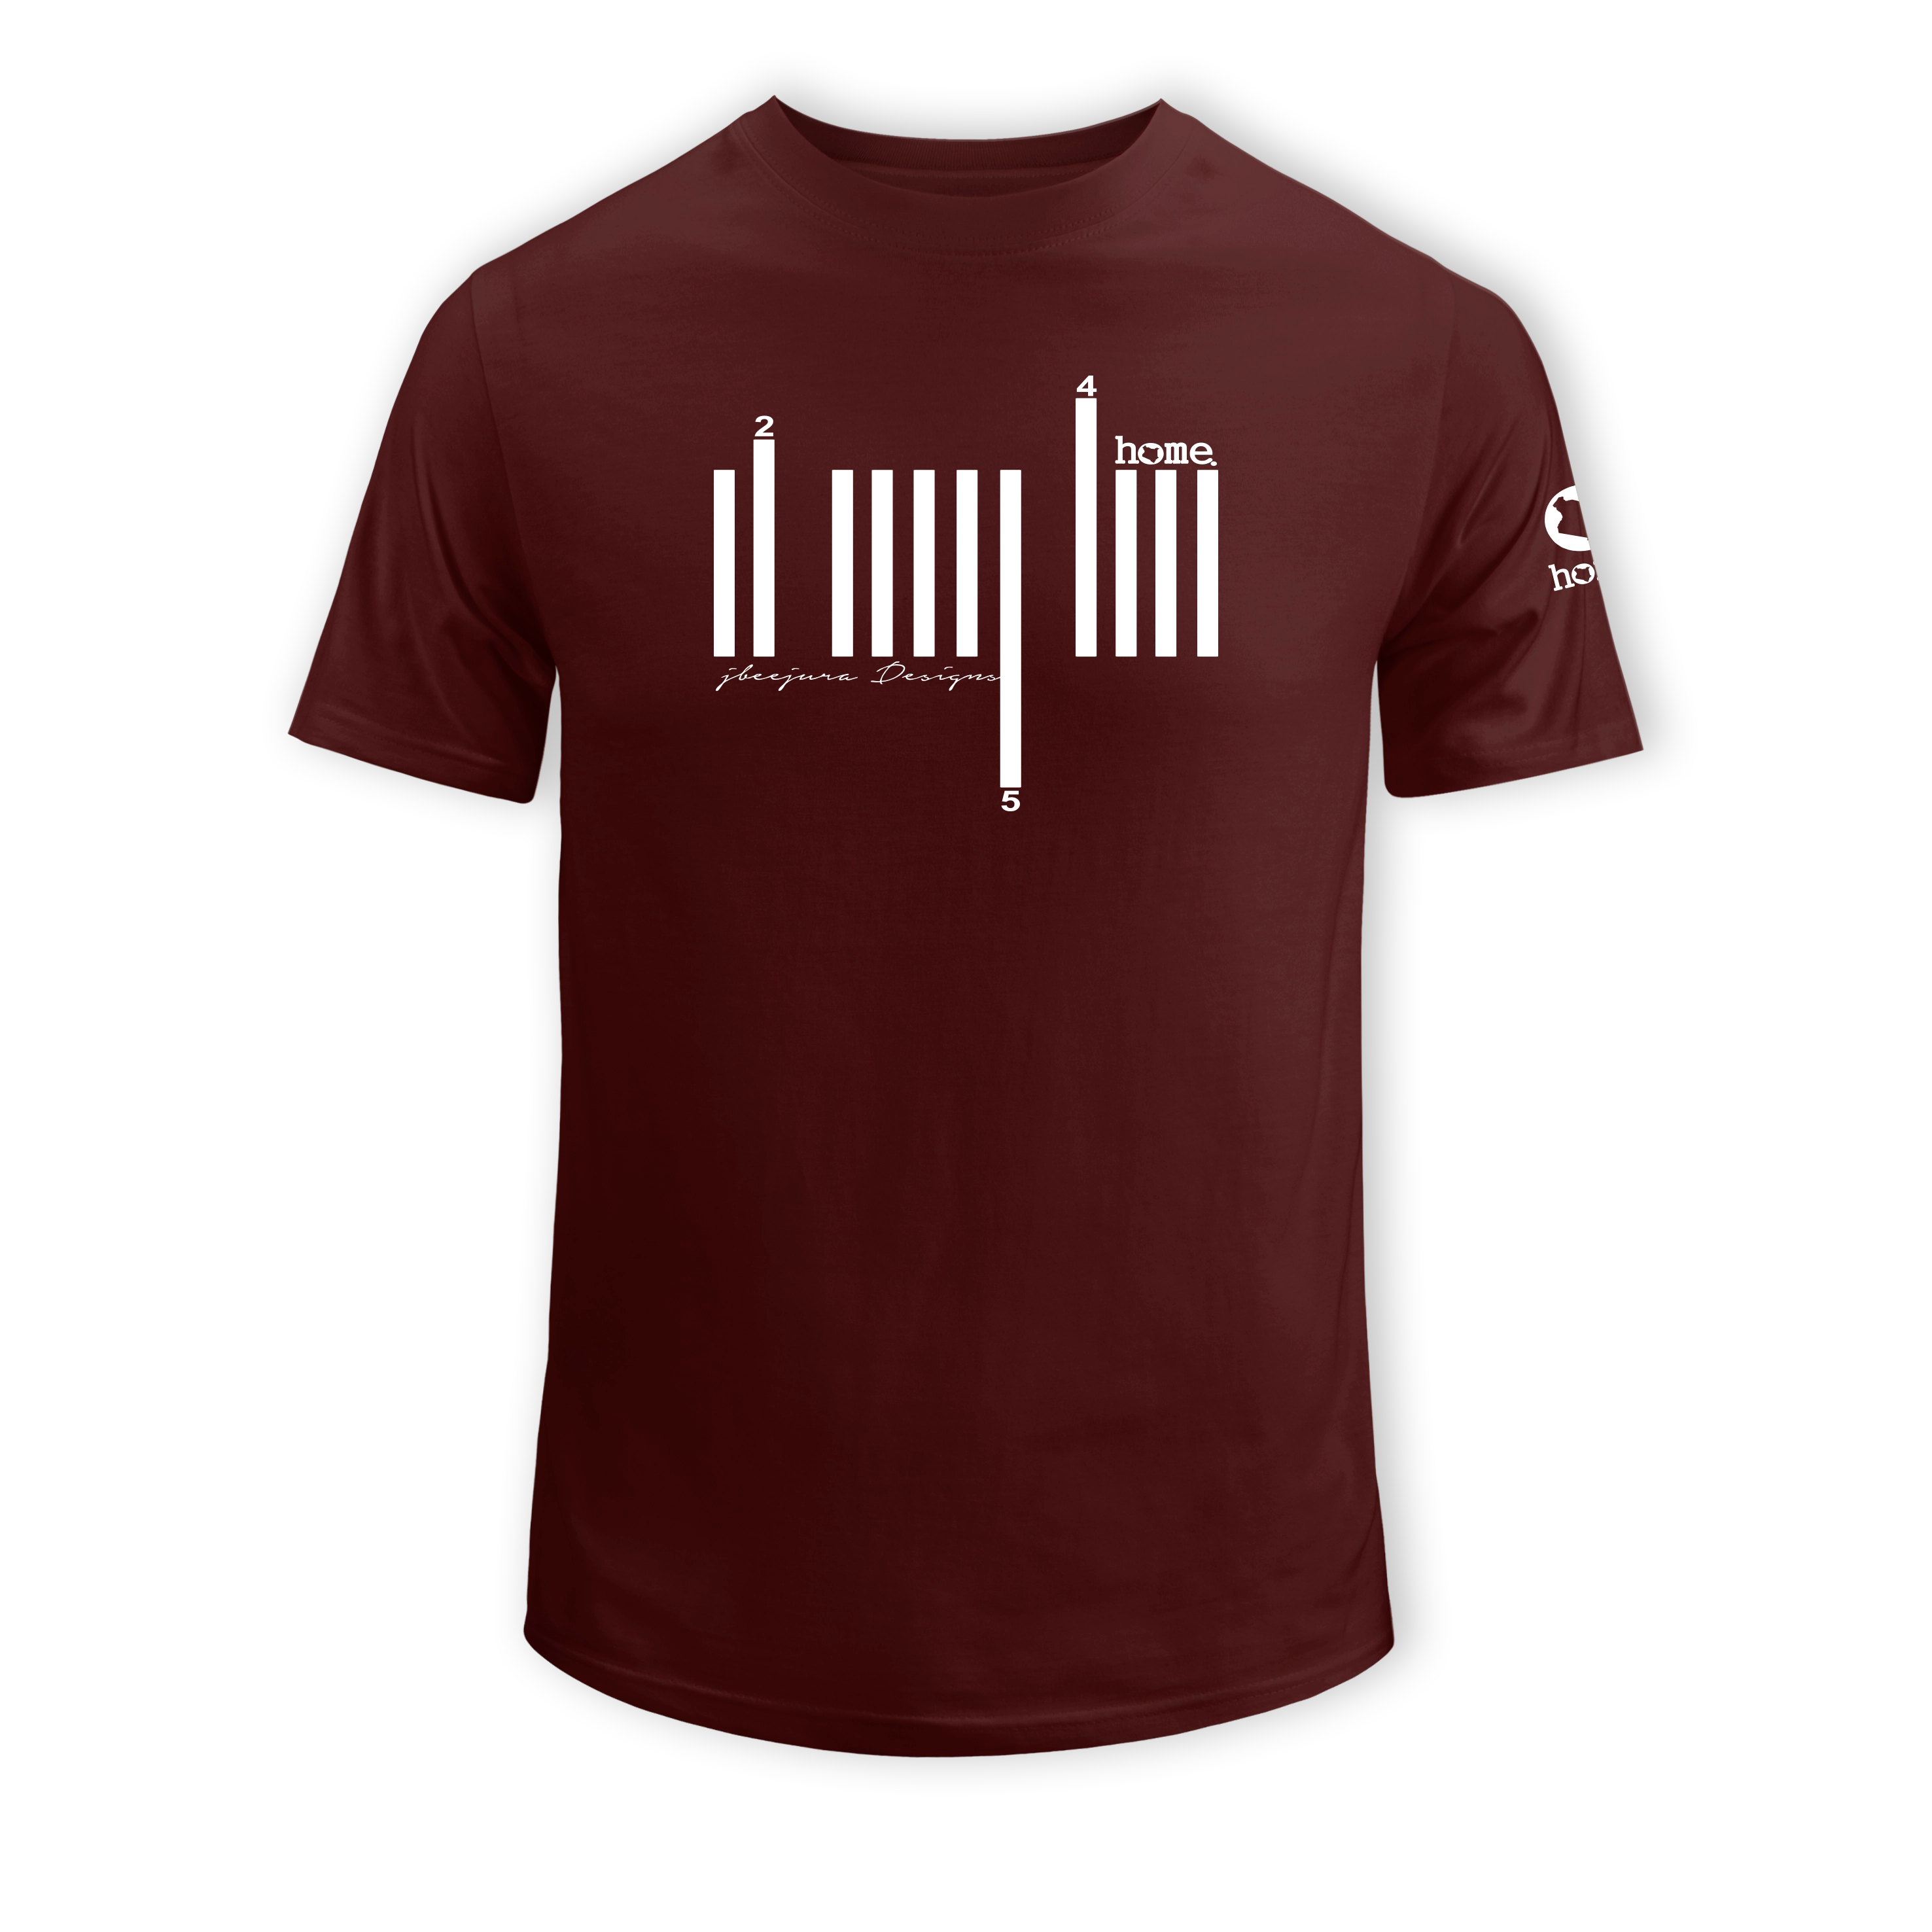 home_254 SHORT-SLEEVED MAROON T-SHIRT WITH A WHITE BARS PRINT – COTTON PLUS FABRIC